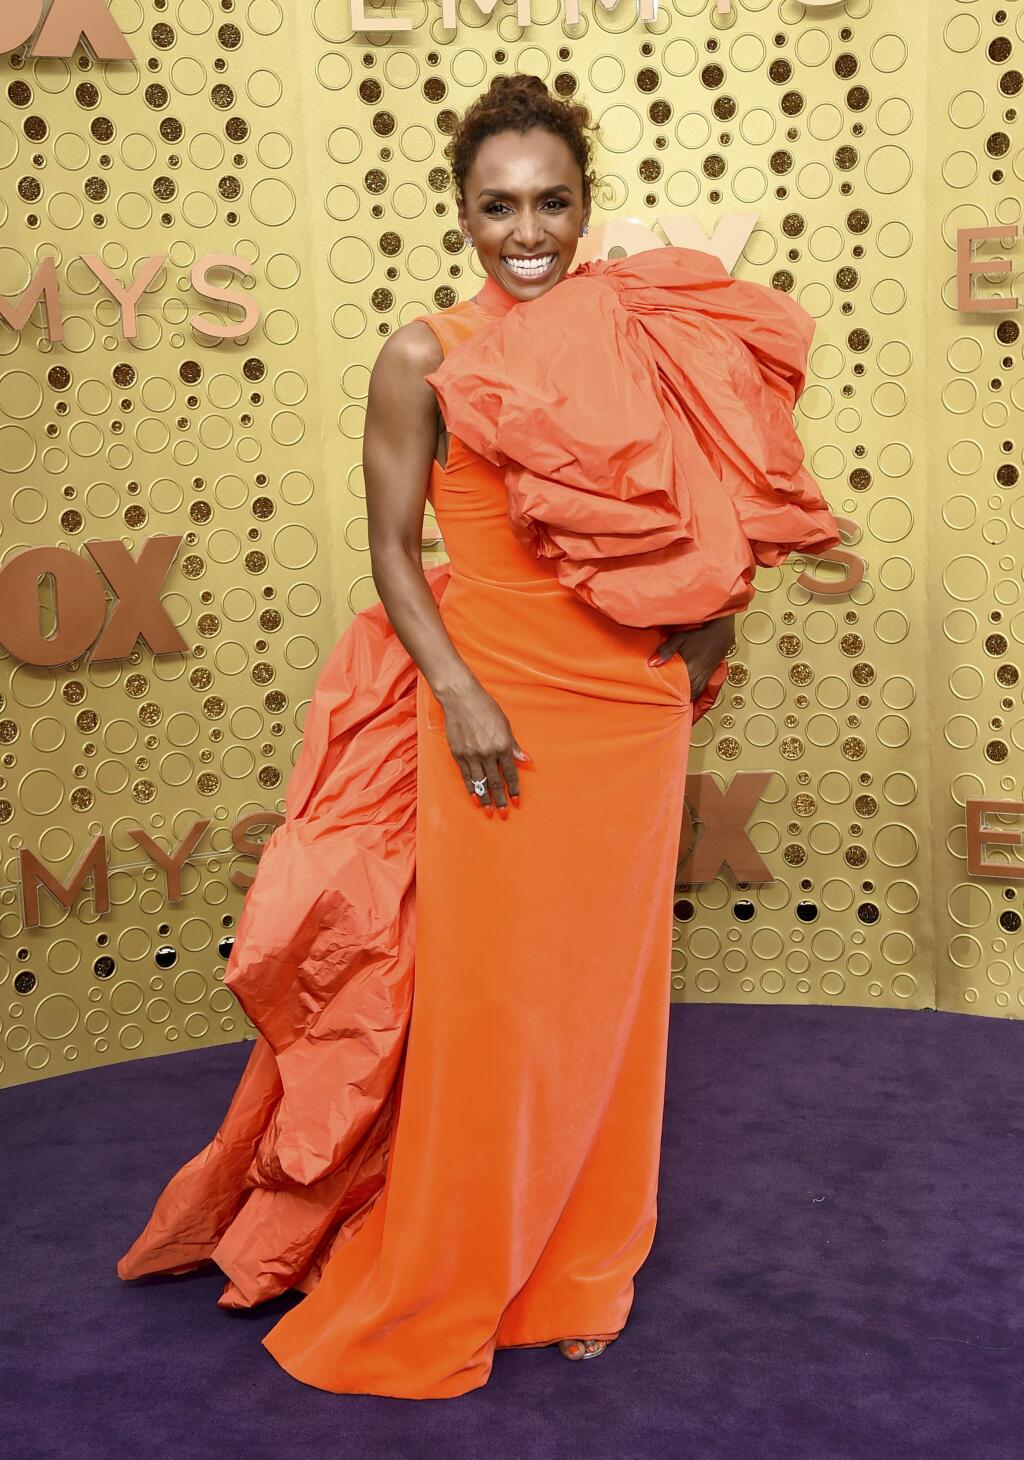 Janet Mock arrives at the 71st Primetime Emmy Awards on Sunday, Sept. 22, 2019, at the Microsoft Theater in Los Angeles. (Photo by Jordan Strauss/Invision/AP)